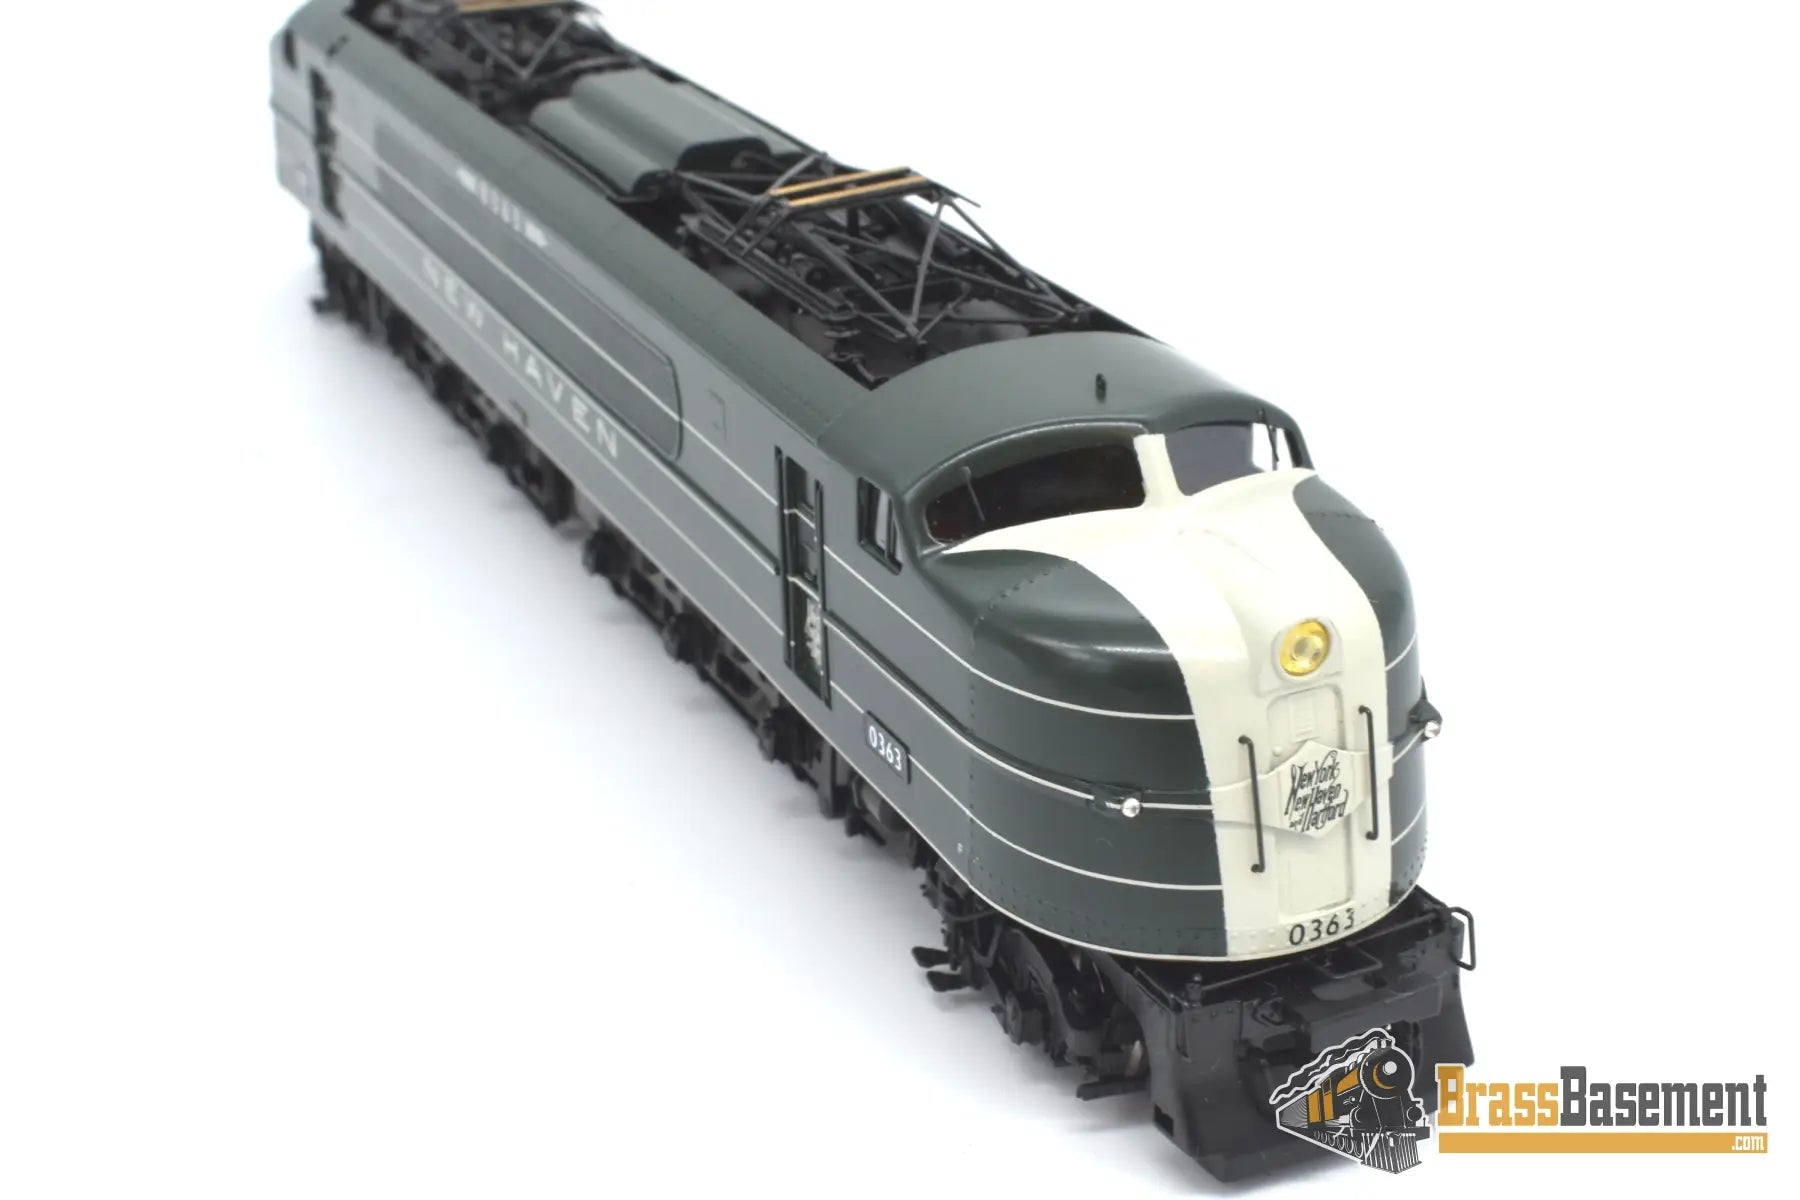 Ho Brass - Omi 6287.2 New Haven Ep - 4 Passenger Electric Factory Painted Hunter